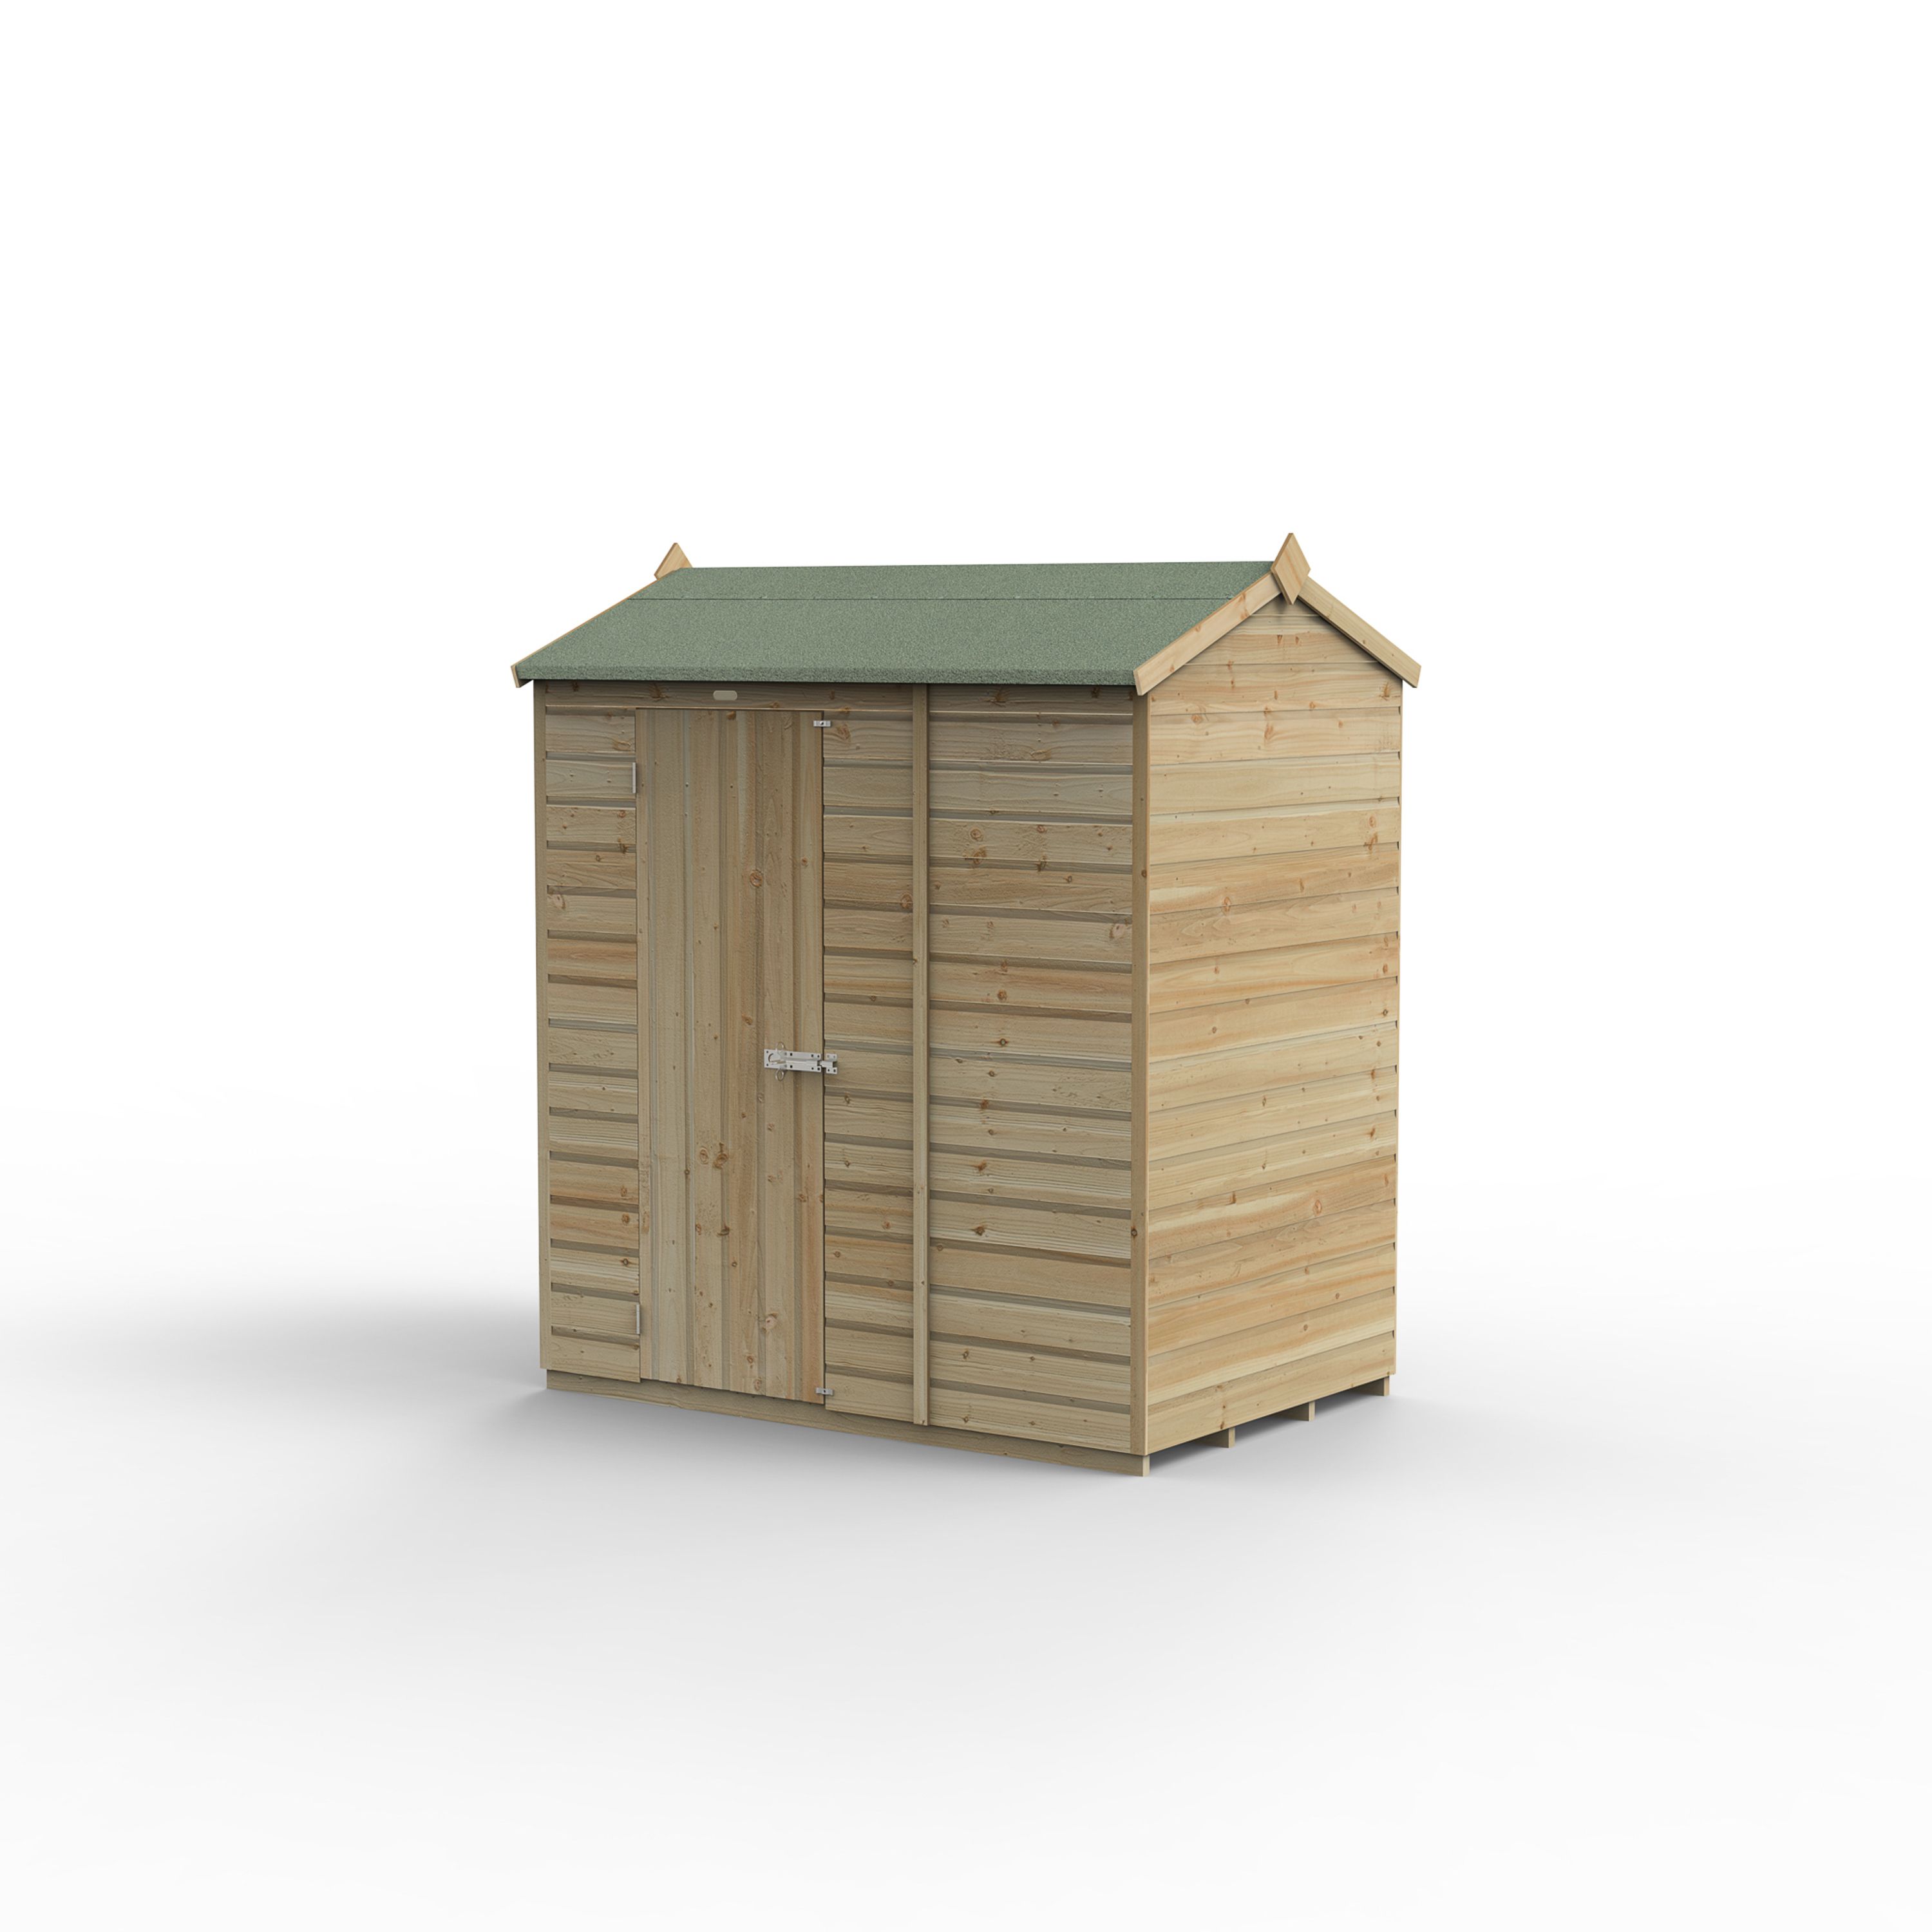 Forest Garden Beckwood 6x4 ft Reverse apex Natural timber Wooden Shed with floor (Base included)